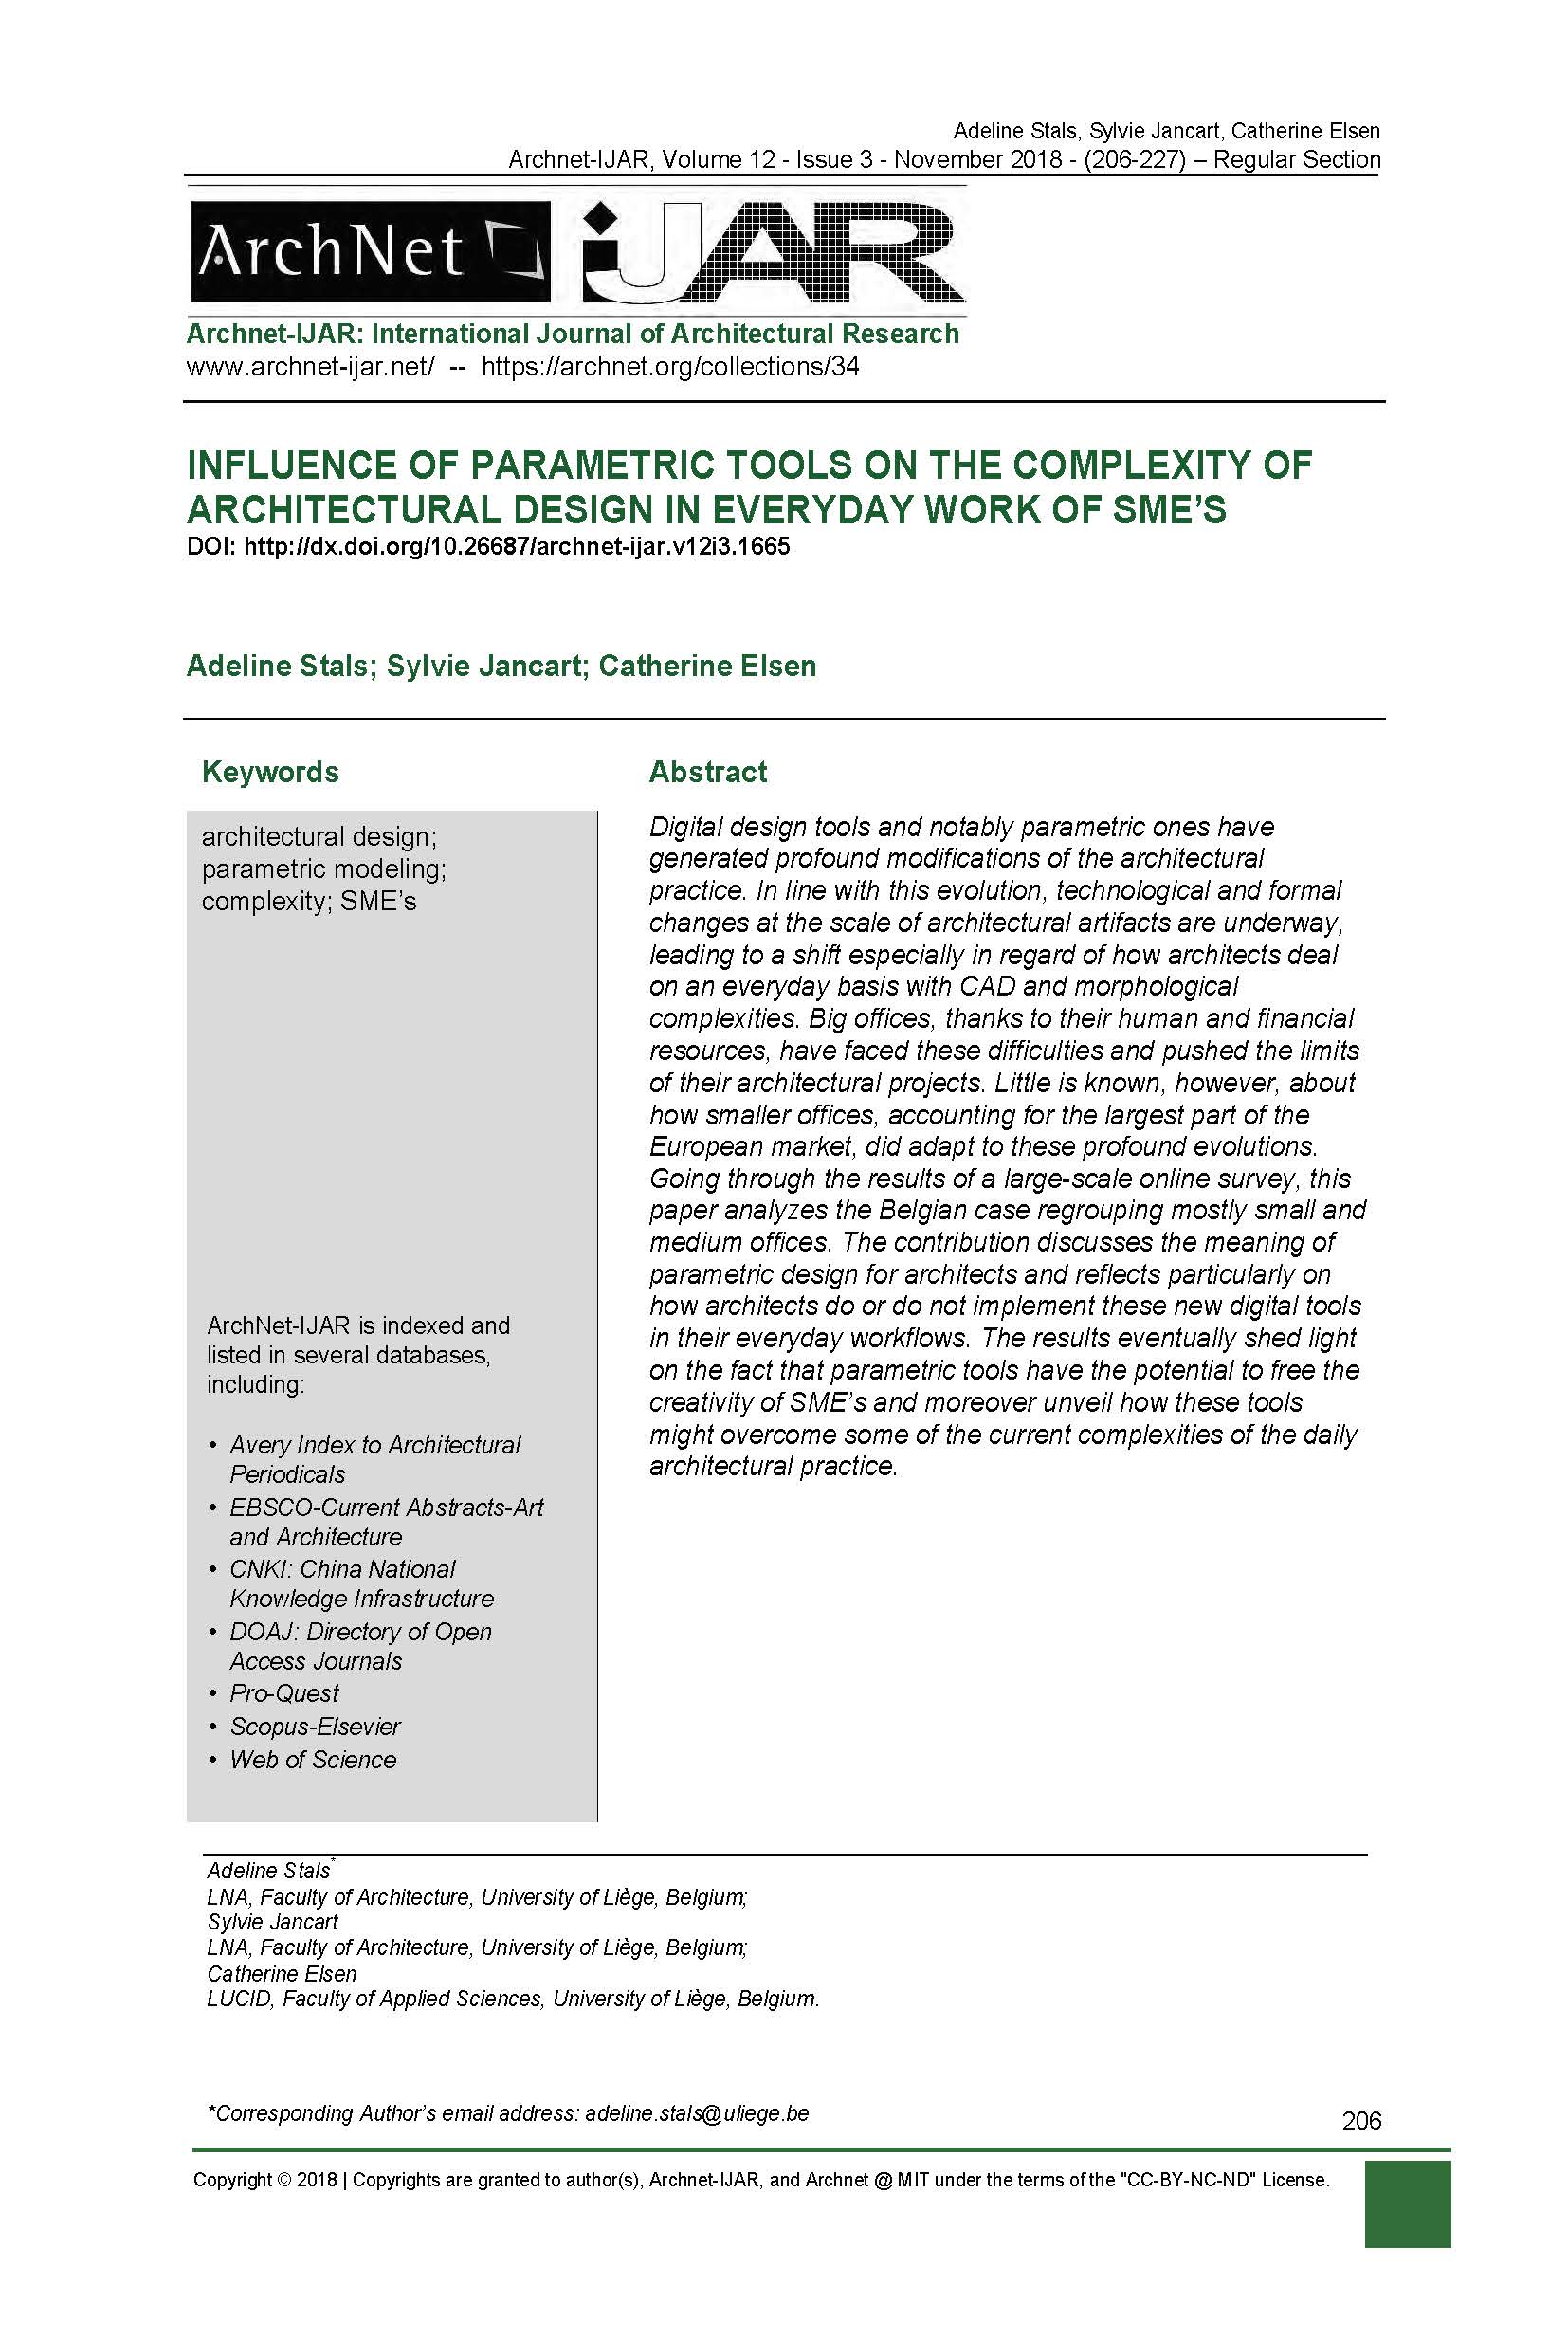 Influence of Parametric Tools on the Complexity of Architectural Design in Everyday Work of SME's